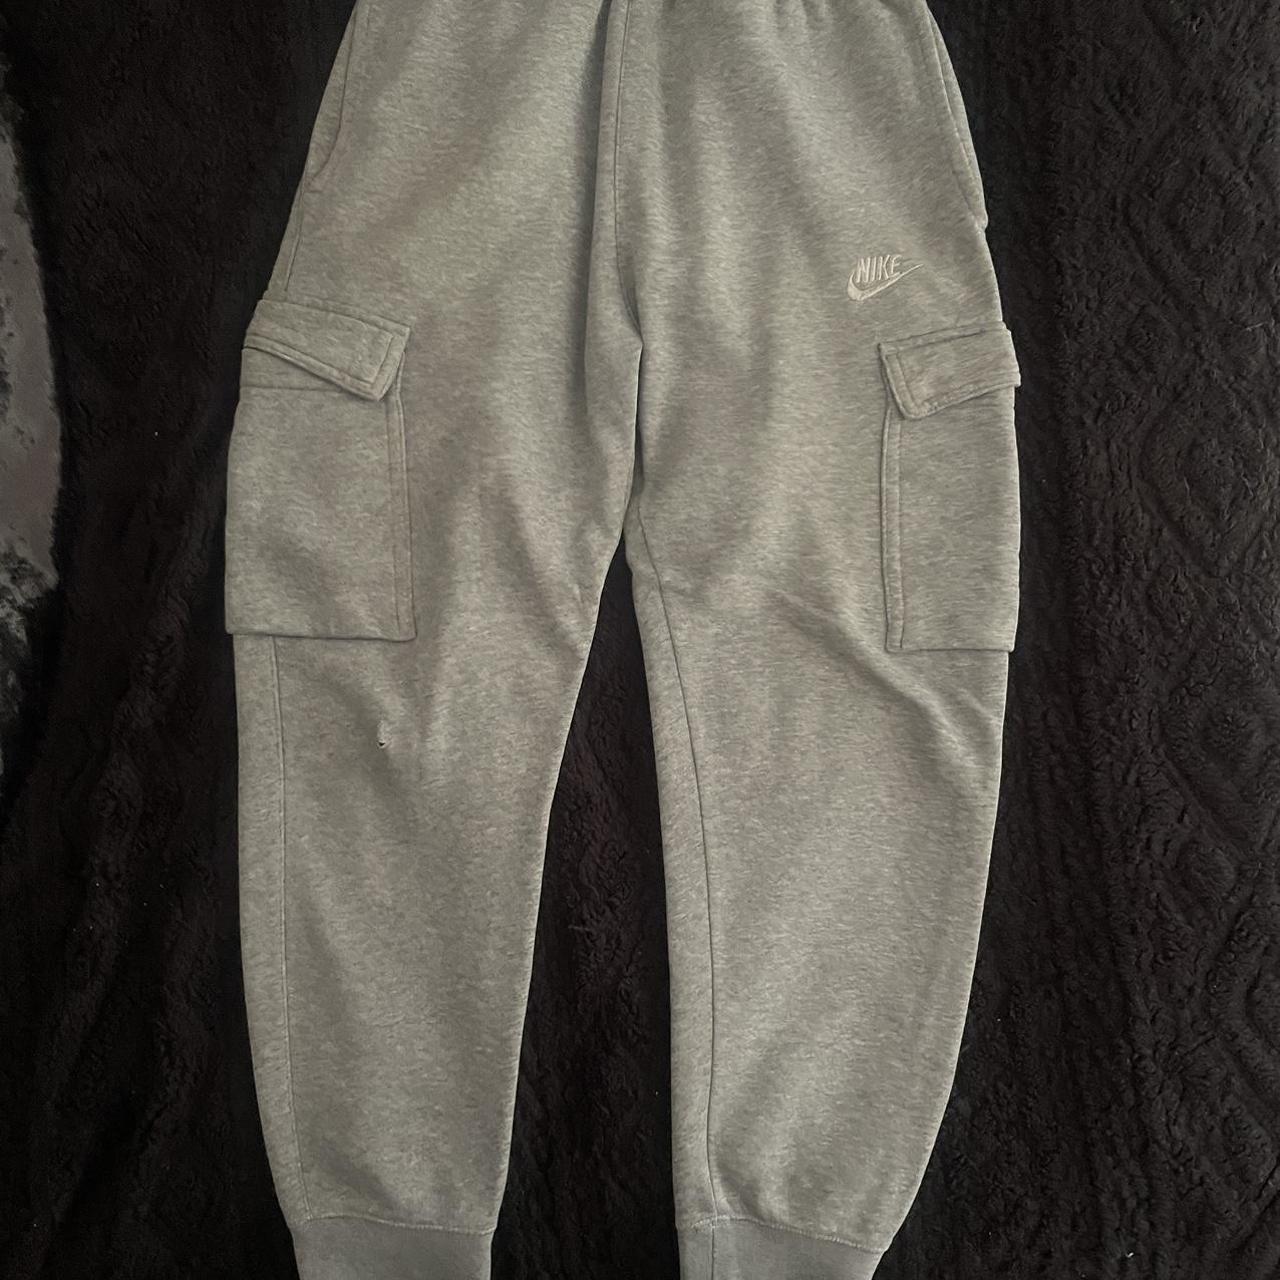 Nike Cargo joggers 8/10 condition only fault shown... - Depop